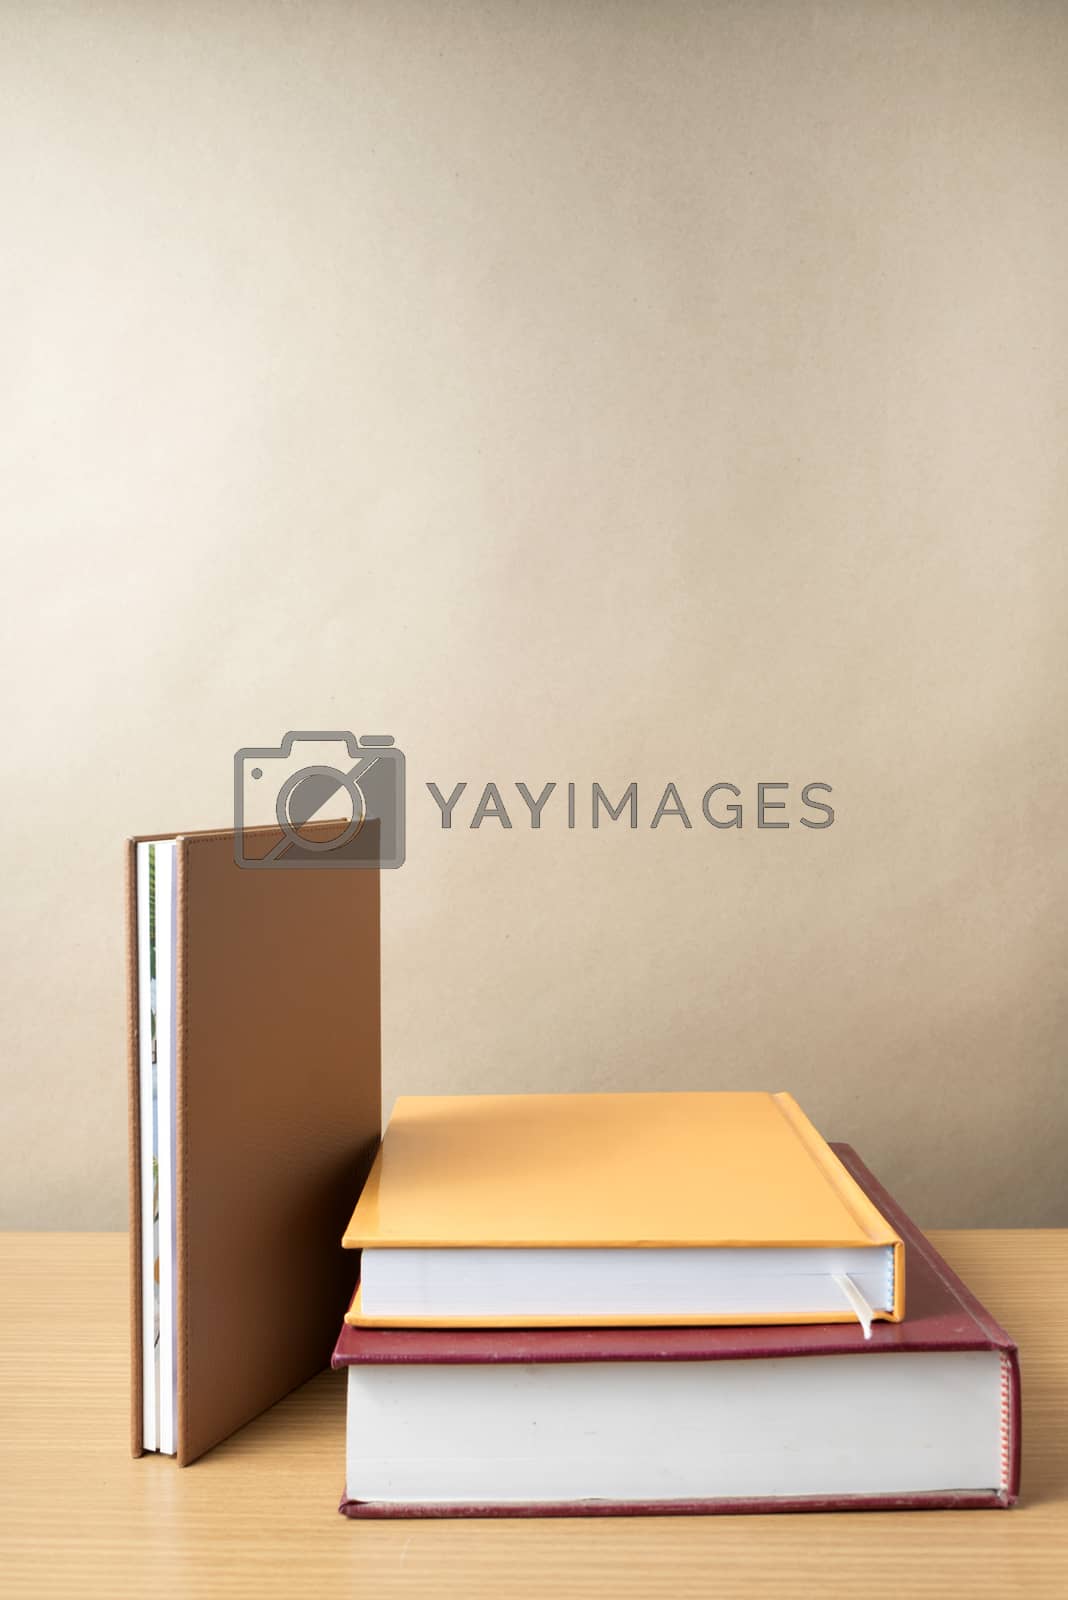 Royalty free image of stack of book  by ammza12